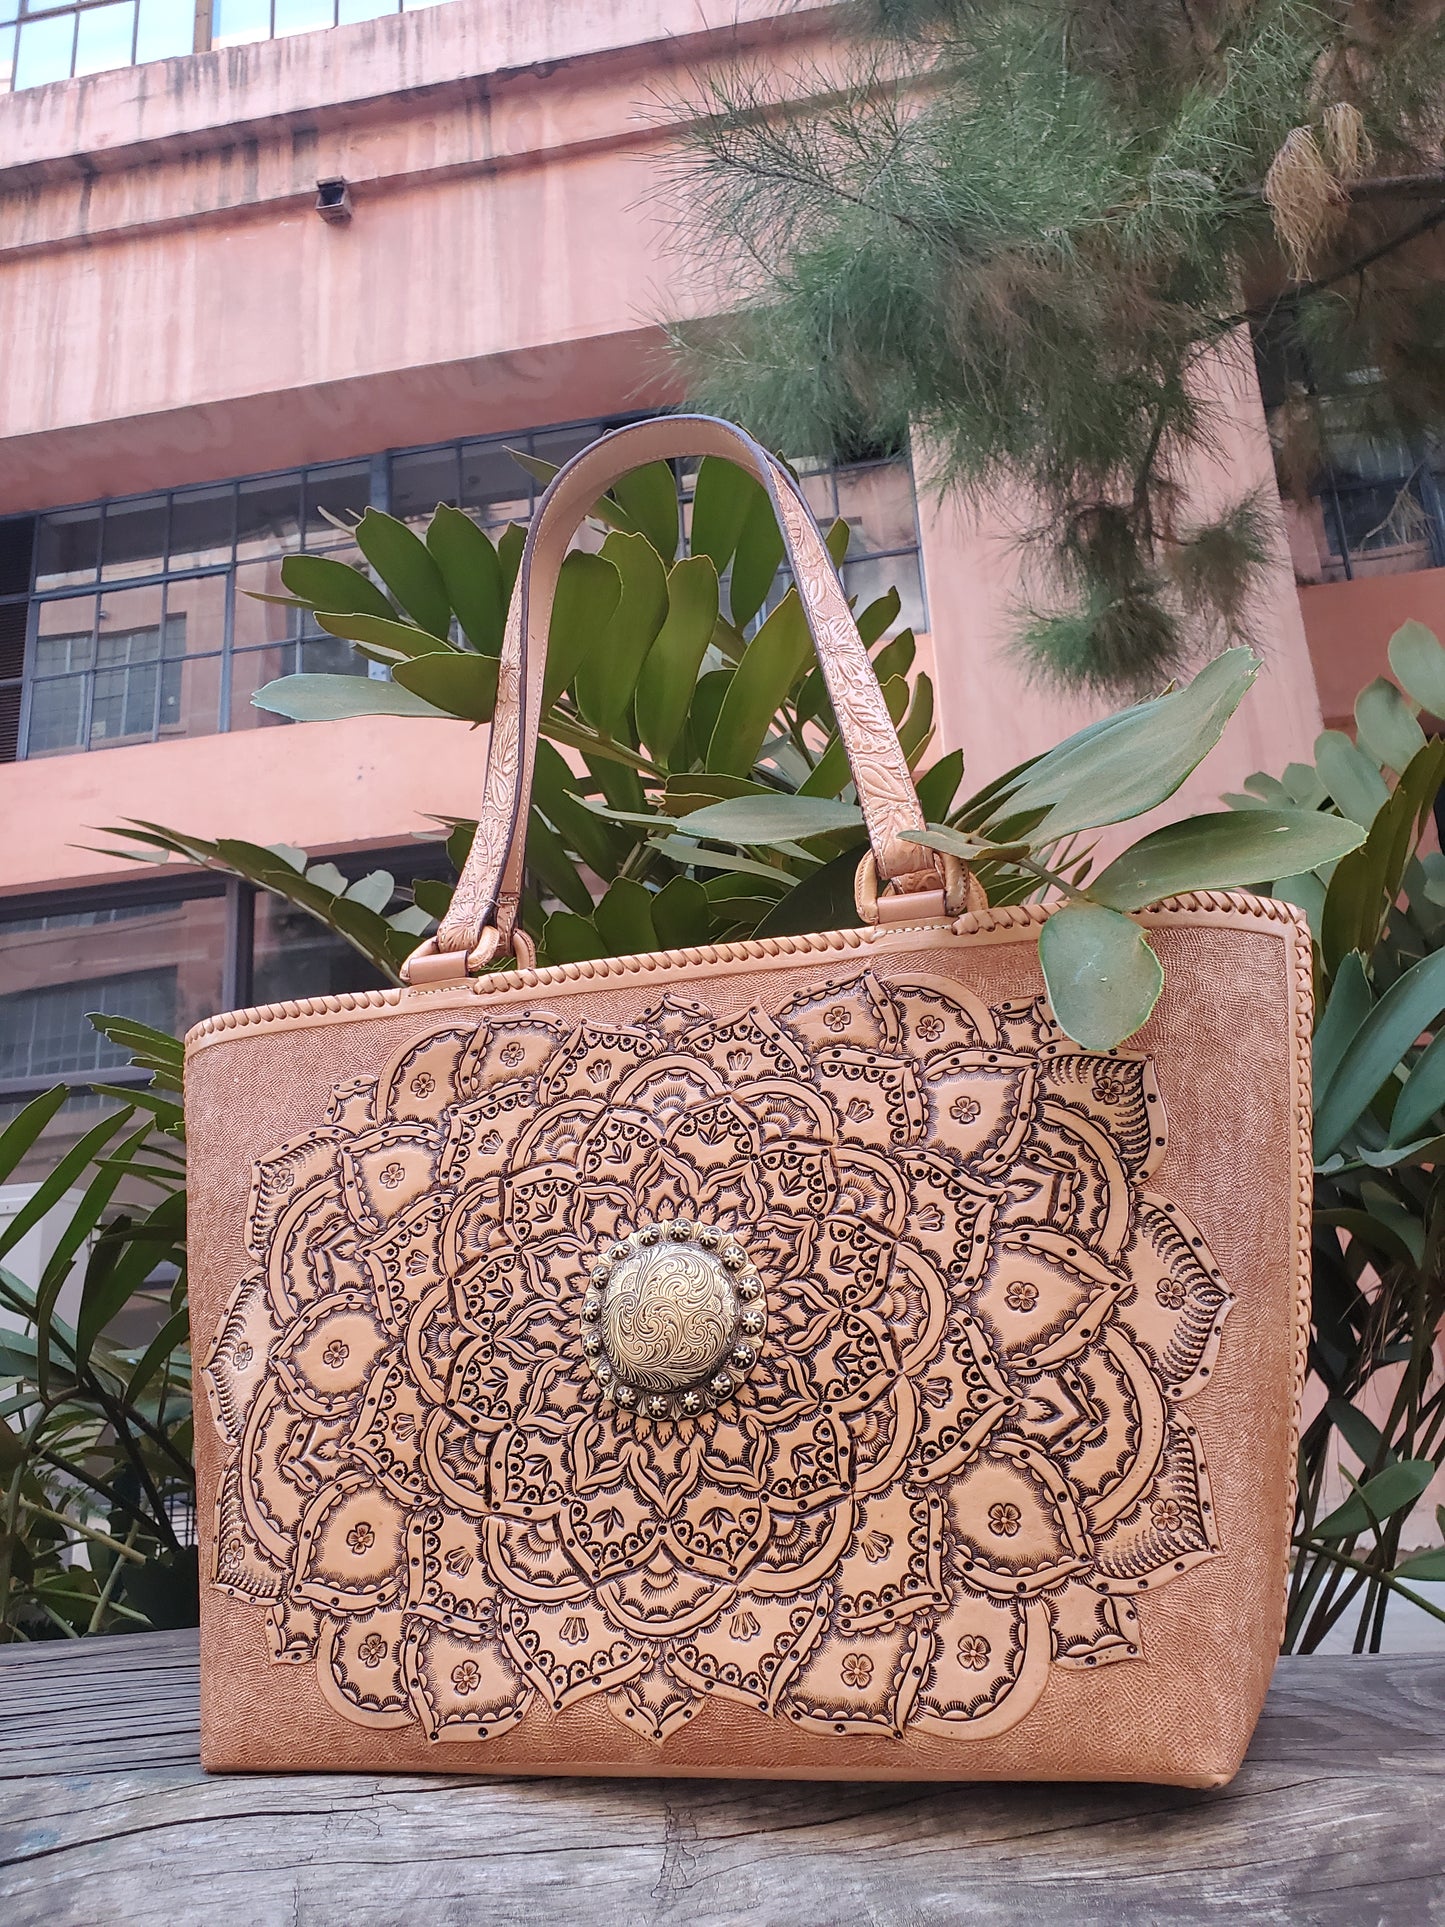 Hand Made Leather Tote Bag "MIA" by MIOHERMOSA Natural Mia Mayan Middle